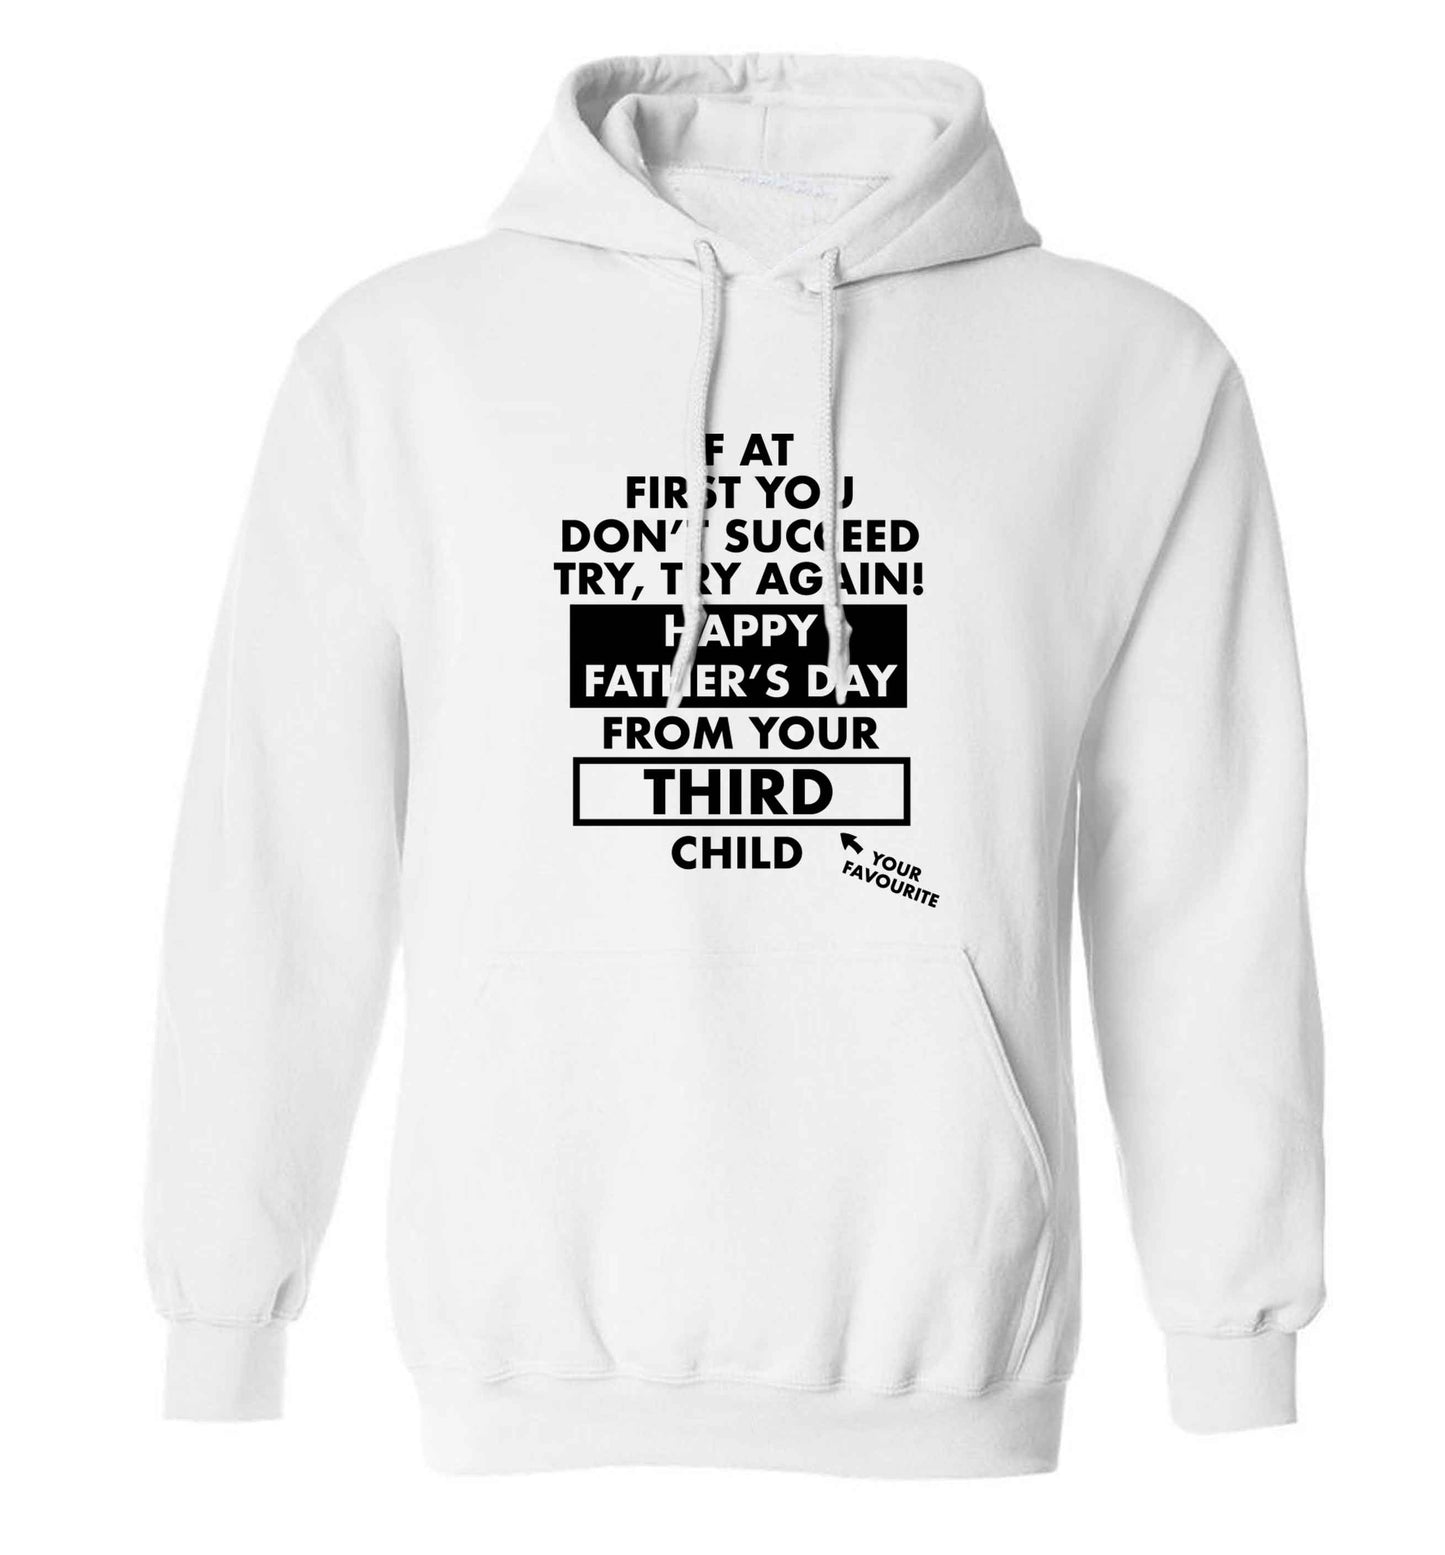 If at first you don't succeed try, try again Happy Father's day from your third child! adults unisex white hoodie 2XL